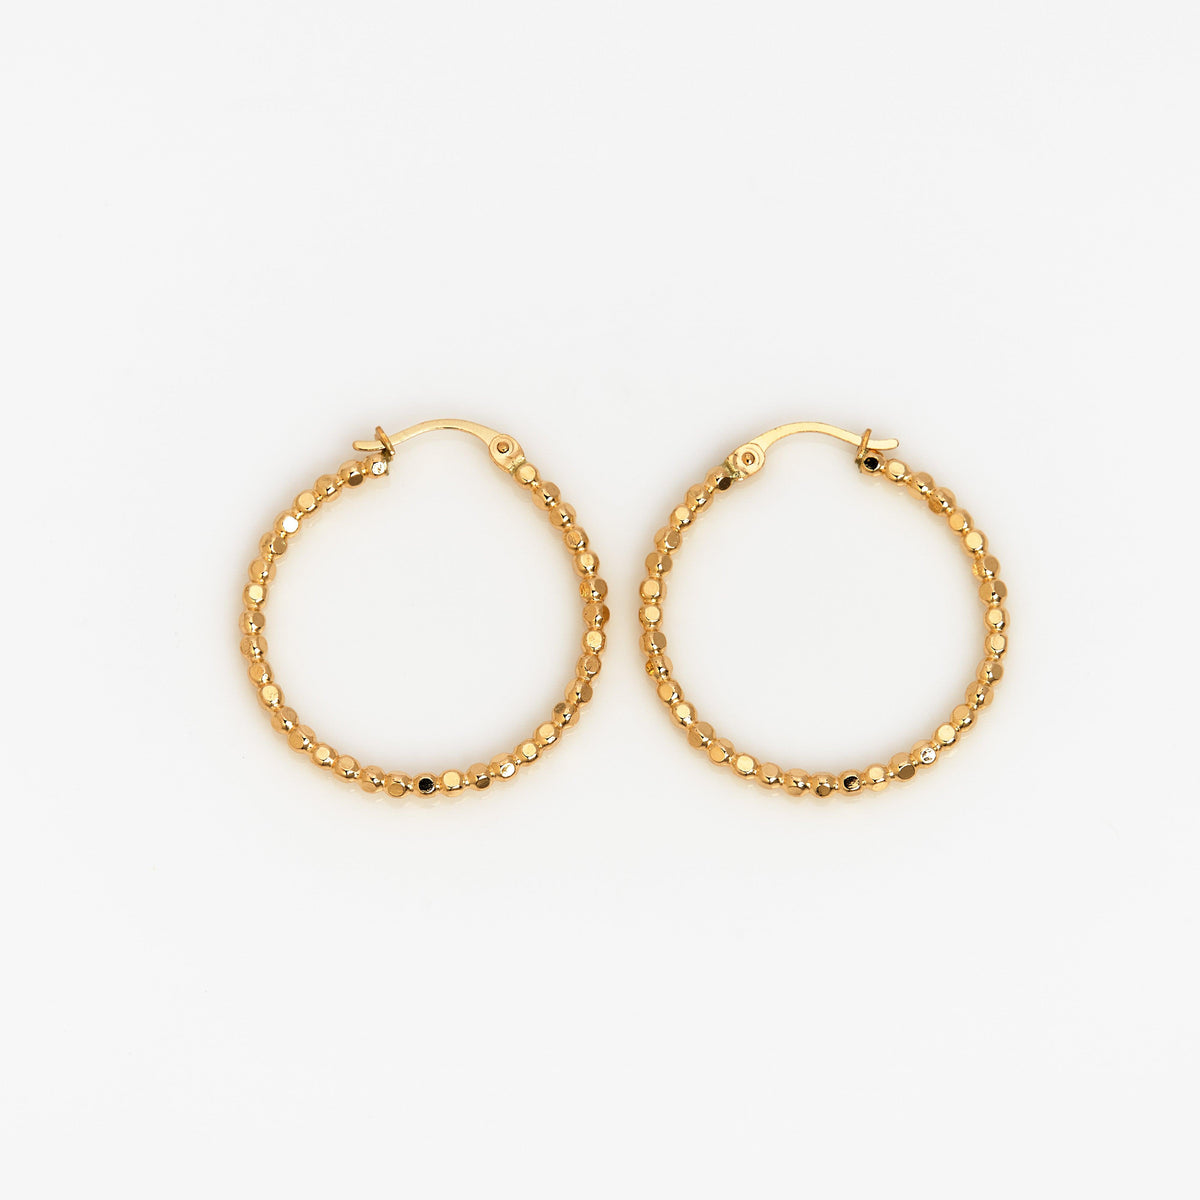 Muse Collection | Nashelle: Handcrafted Gold Jewelry